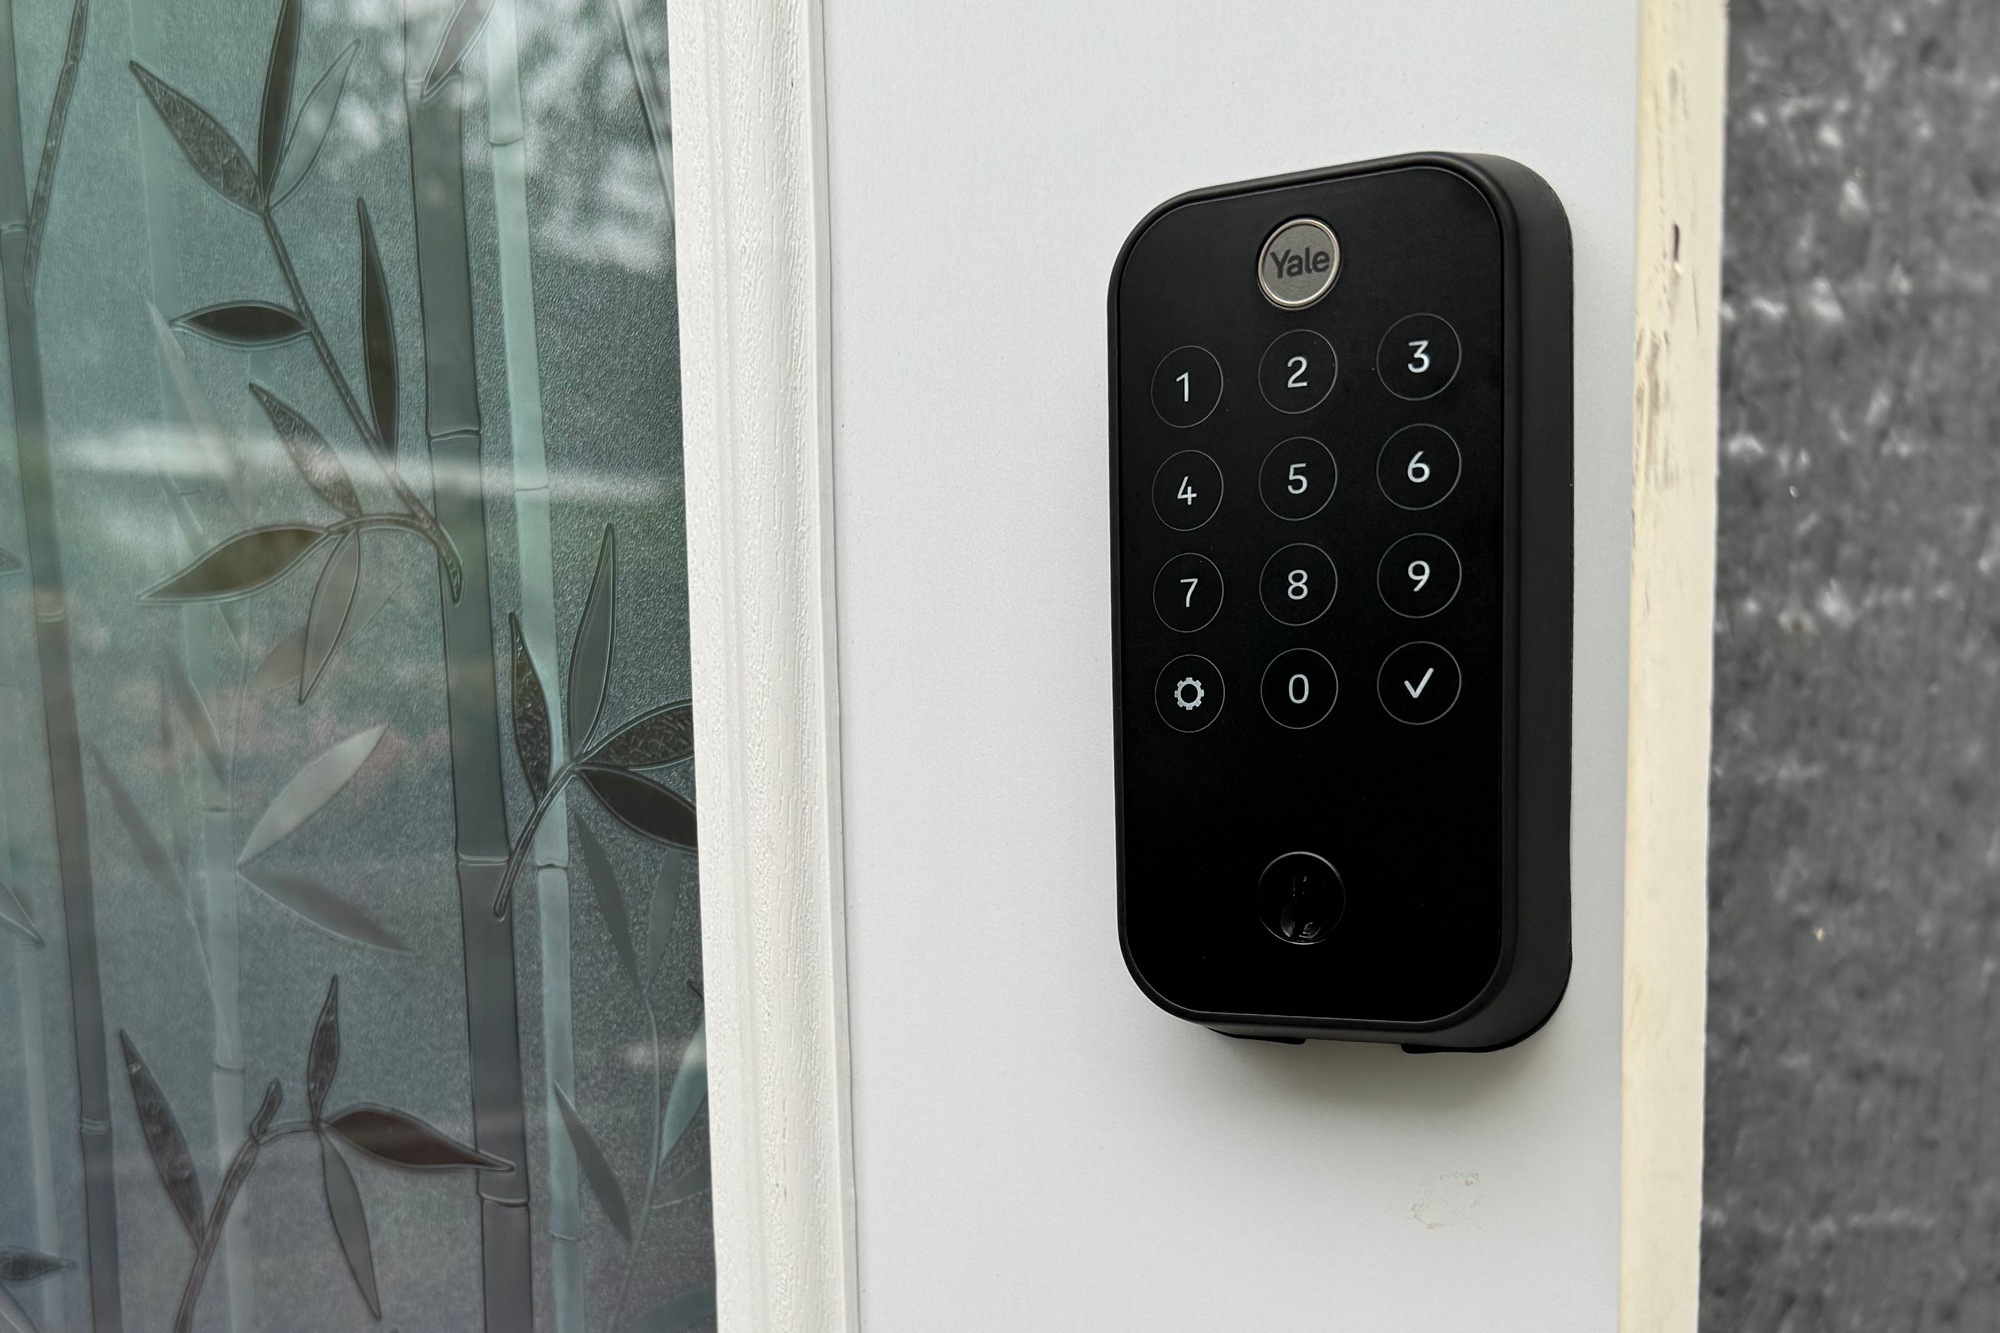 Yale Assure Lock 2 Touch Wi-Fi keypad activated